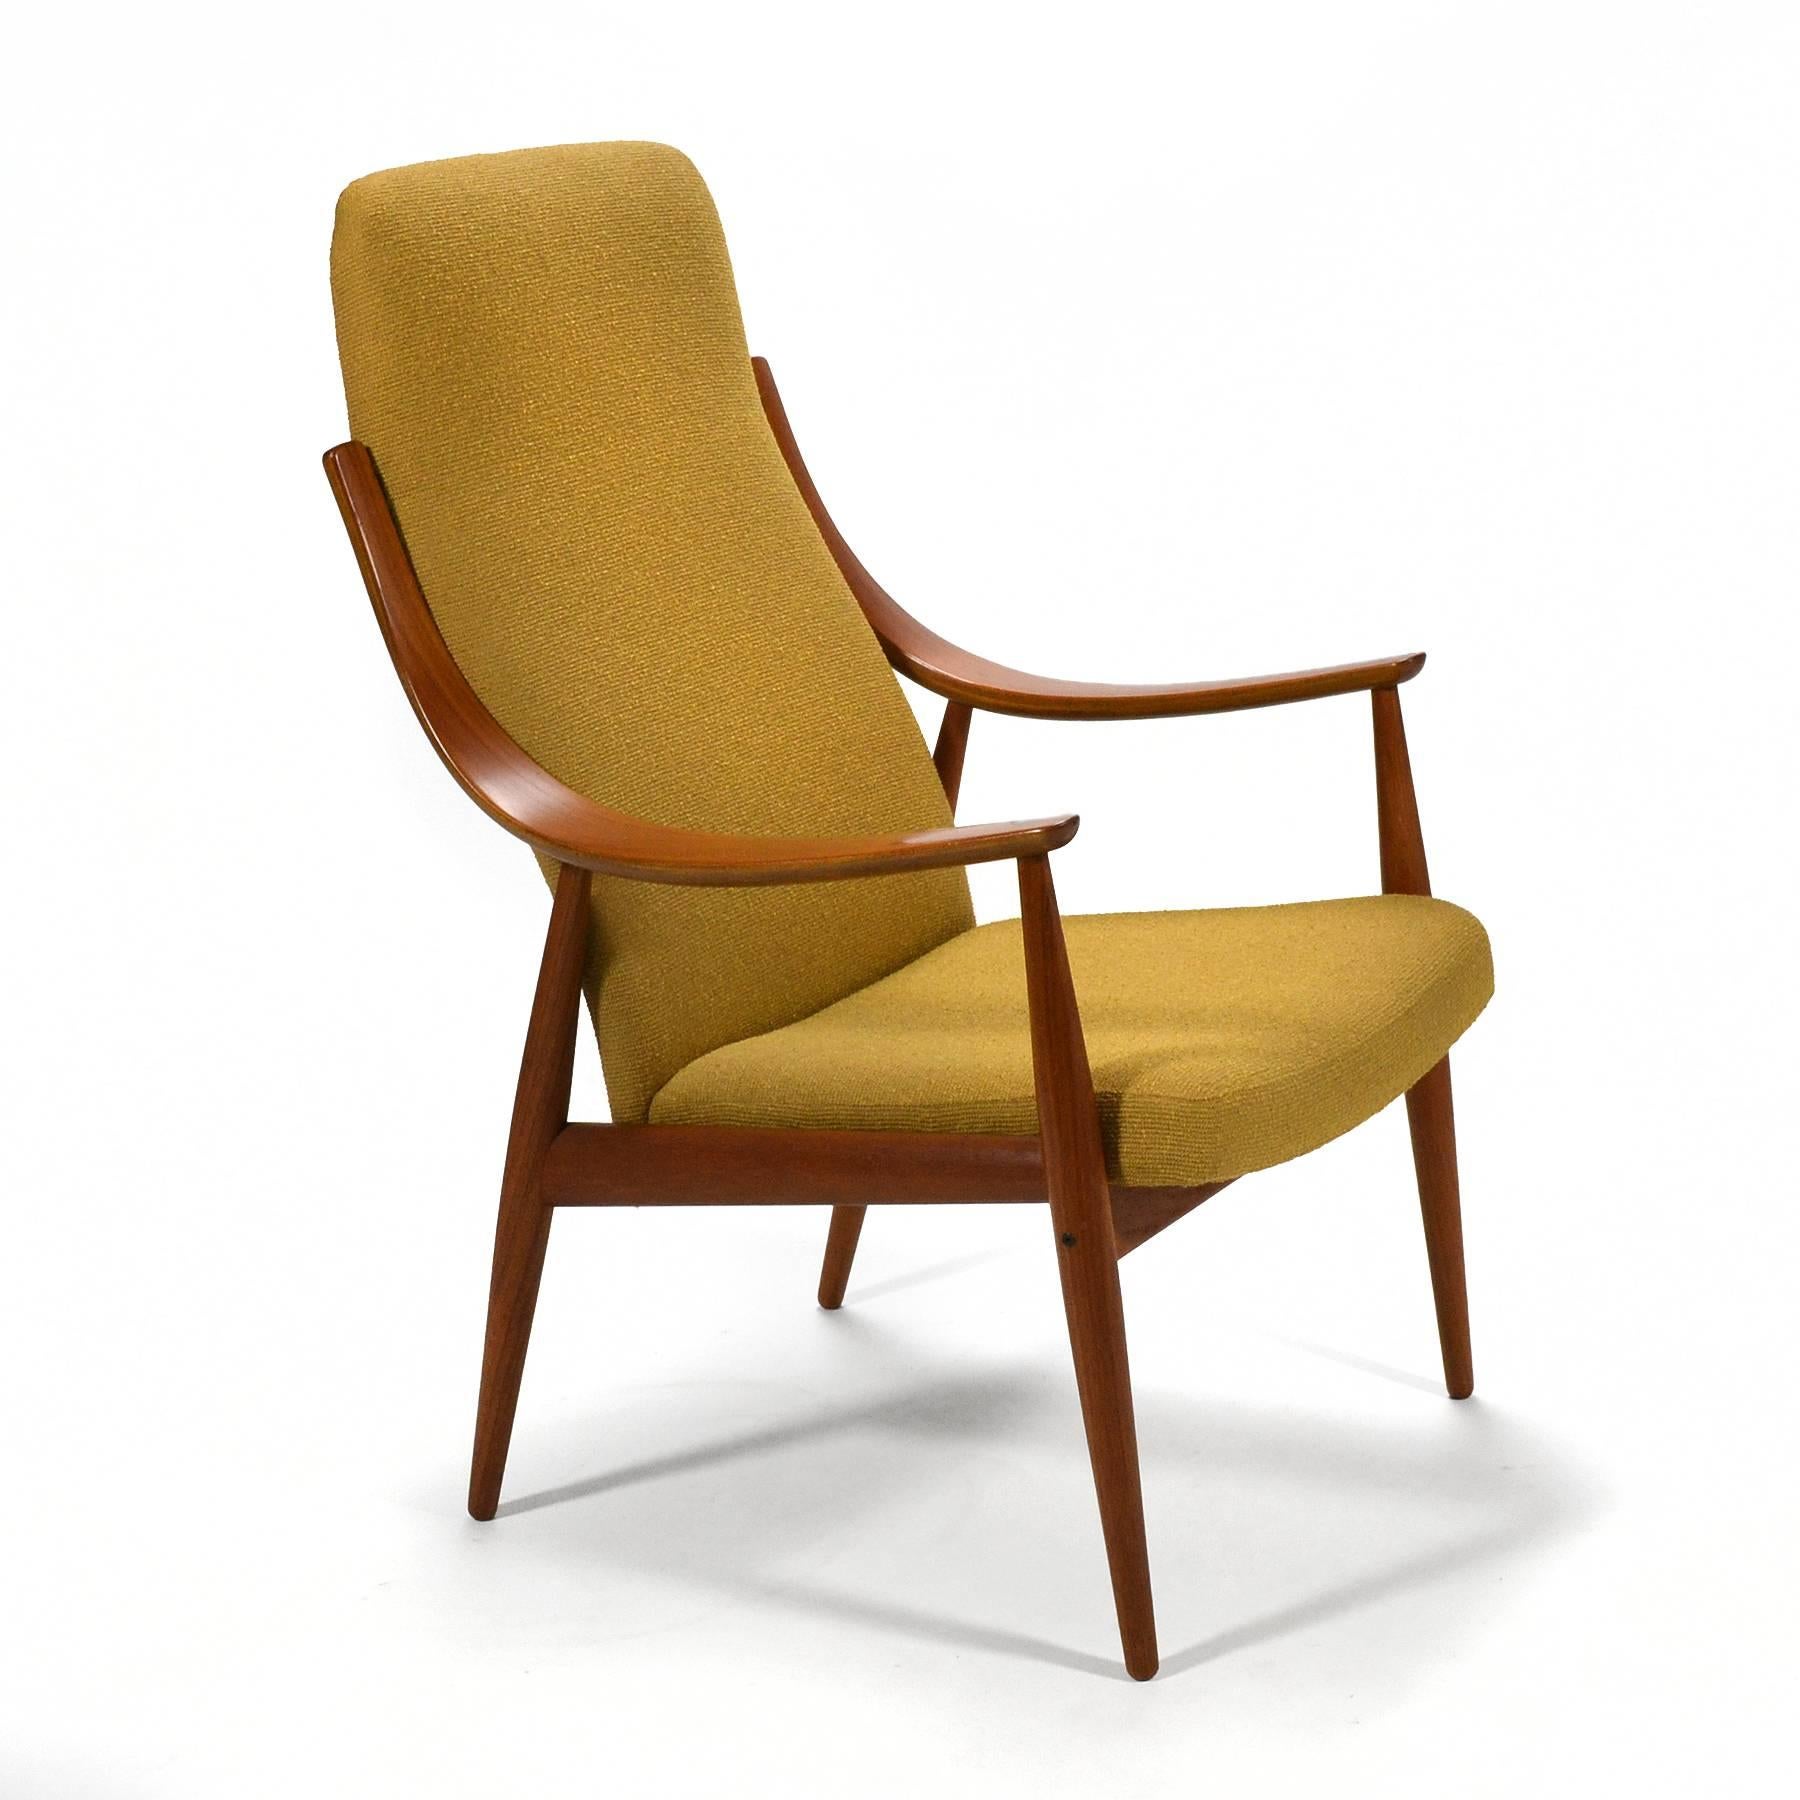 A beautiful design by Hvidt and Mølgaard-Nielsen, this chair has elegant lines and is impeccably constructed. Light and airy, the chair is very comfortable with both lumbar and head support.
The frame of solid and laminated teak has wonderful